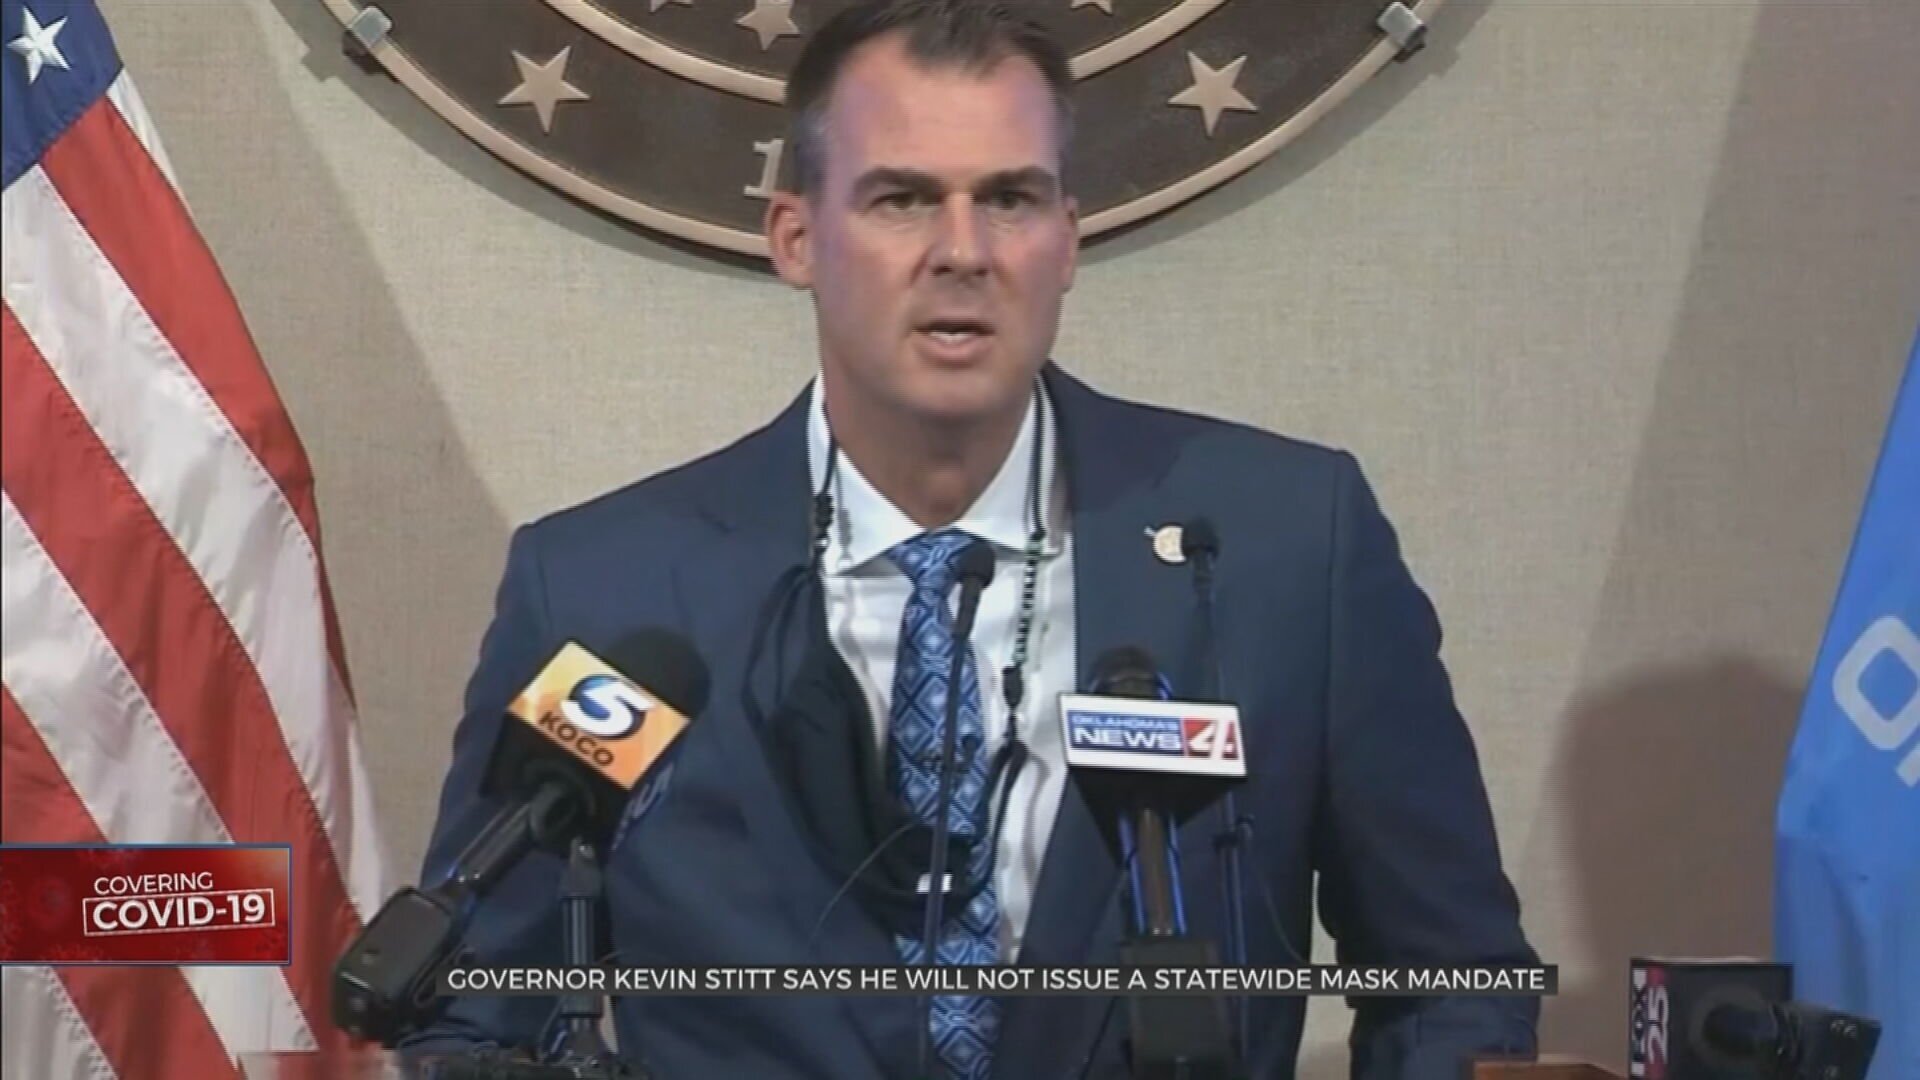 Gov Stitt Offers Updates About COVID-19, Treatments In Oklahoma